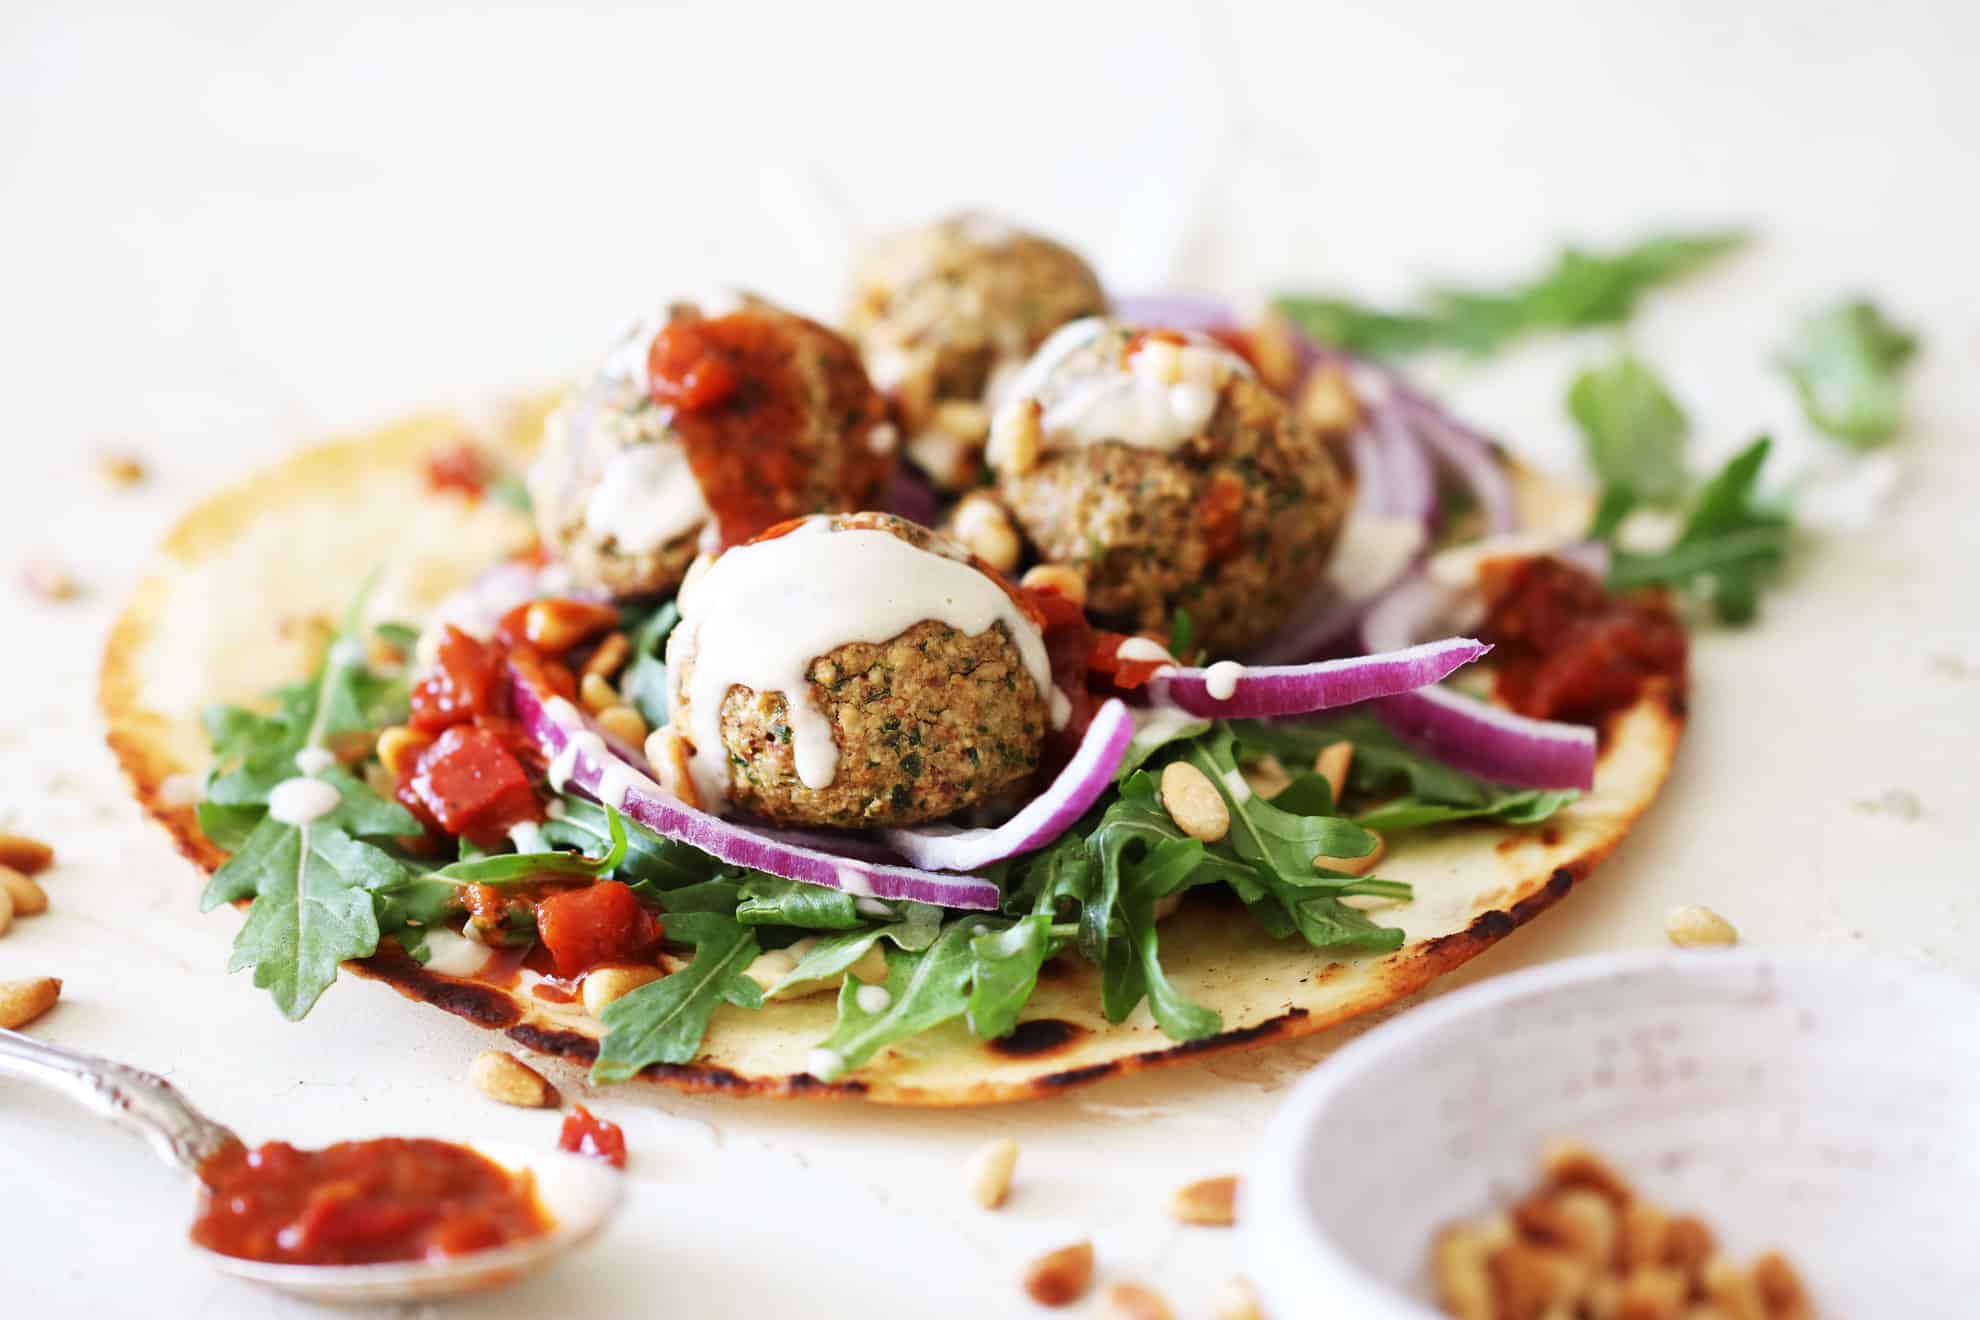 Homemade Baked Falafel without Chickpeas